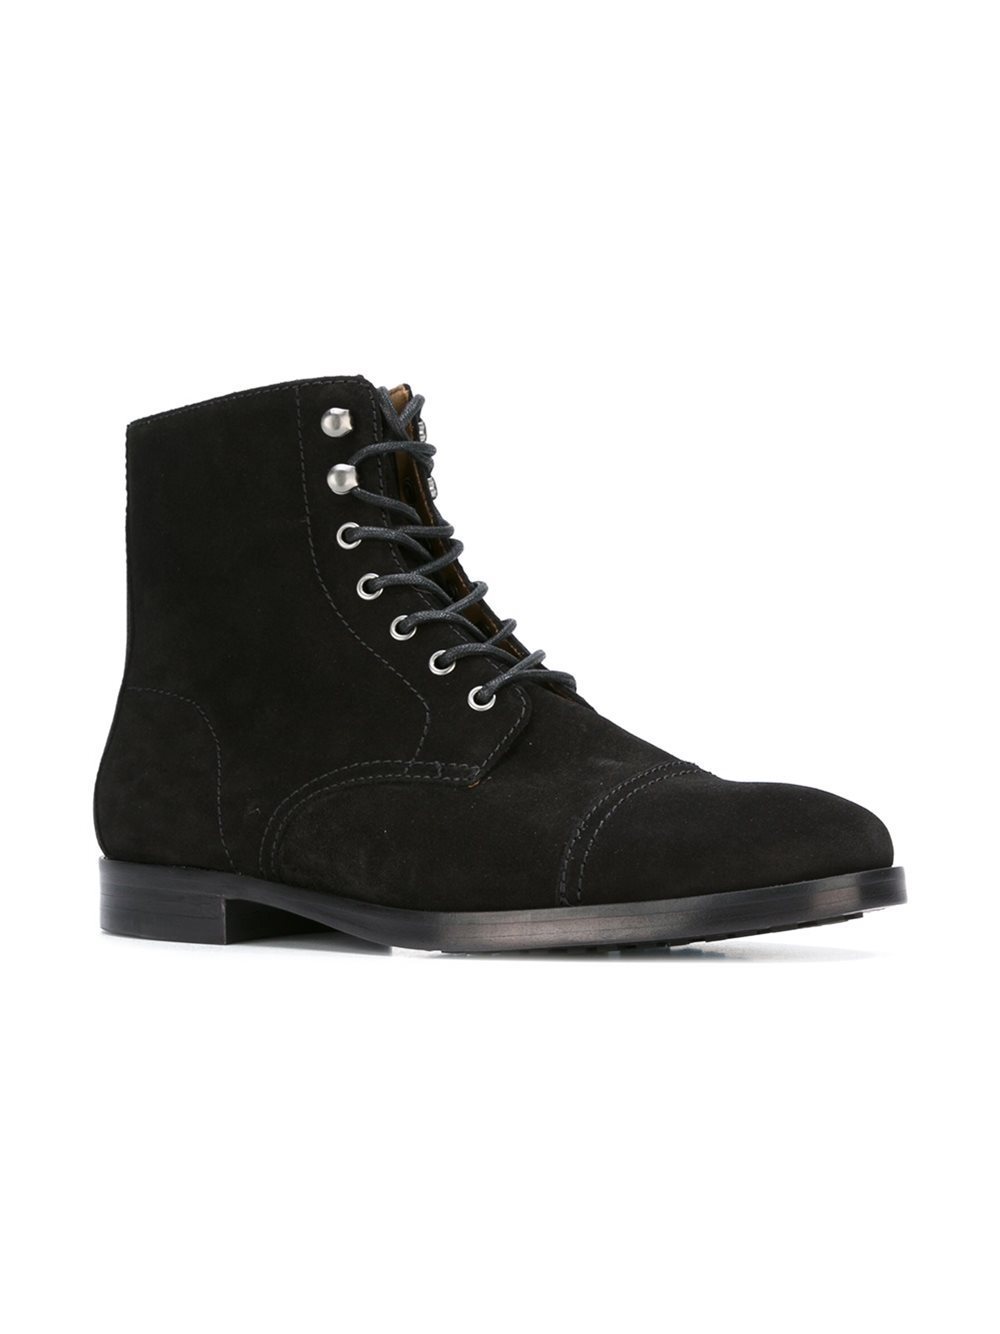 NEW Handcrafted mens fashion black suede lace up boots, Men suede ankle boots